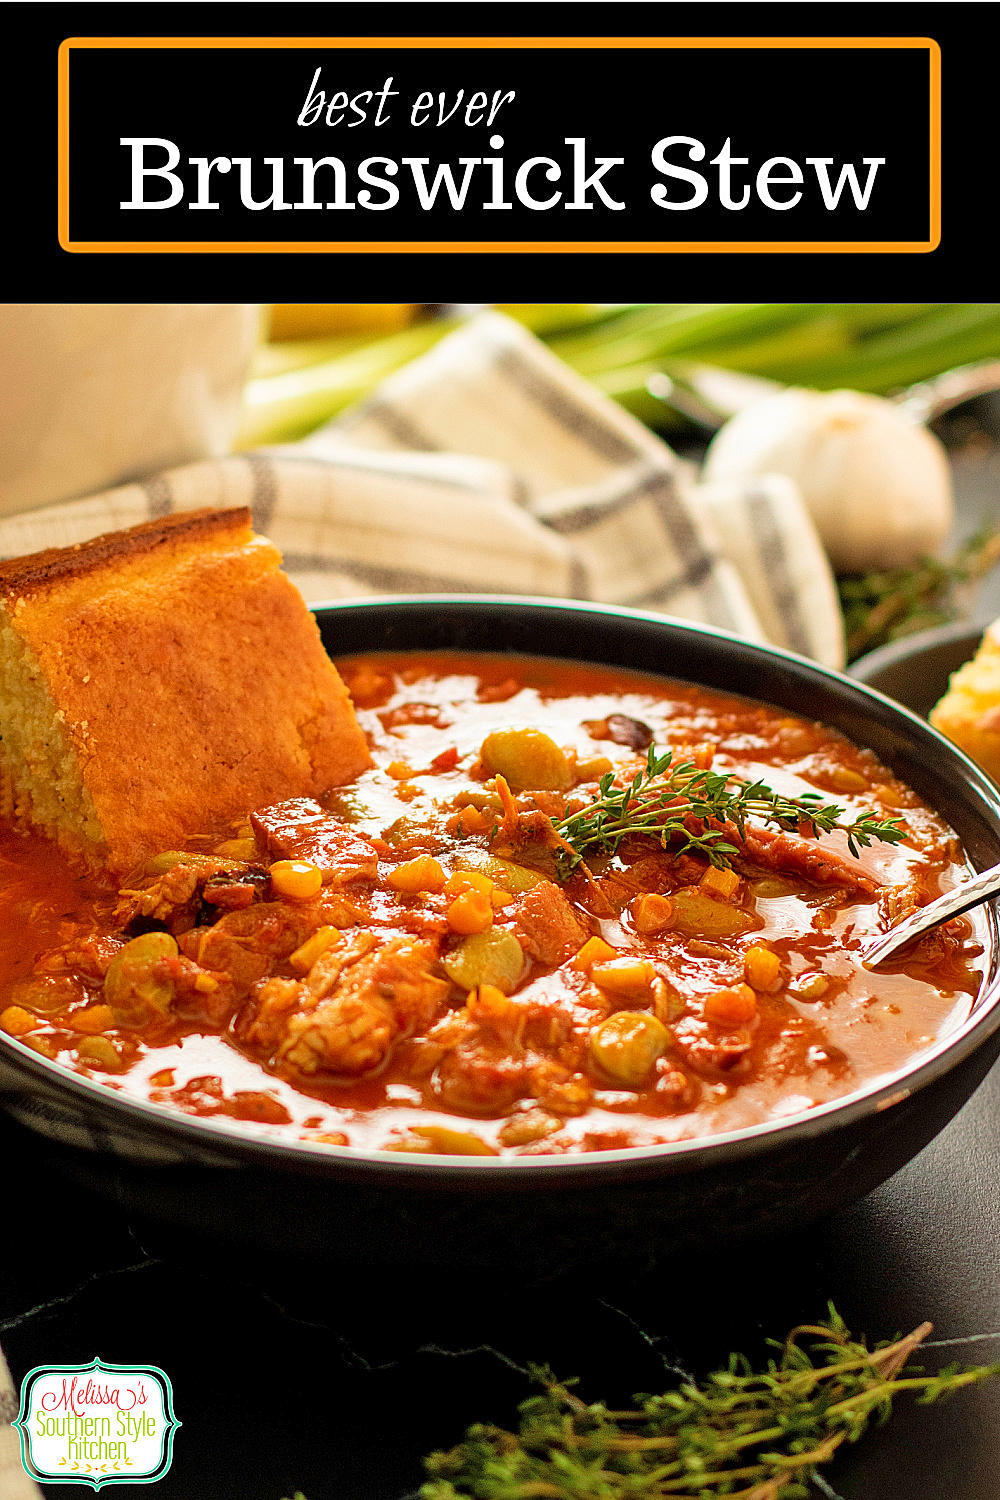 This perfectly seasoned Brunswick Stew features pulled chicken, smoked pork and smoked brisket combined with classic lima beans and corn. #brunswickstew #chickenstew #stewrecipes #easystewrecipes #pulledpork #smokedbrisketrecipes #soup #easybrunswickstew